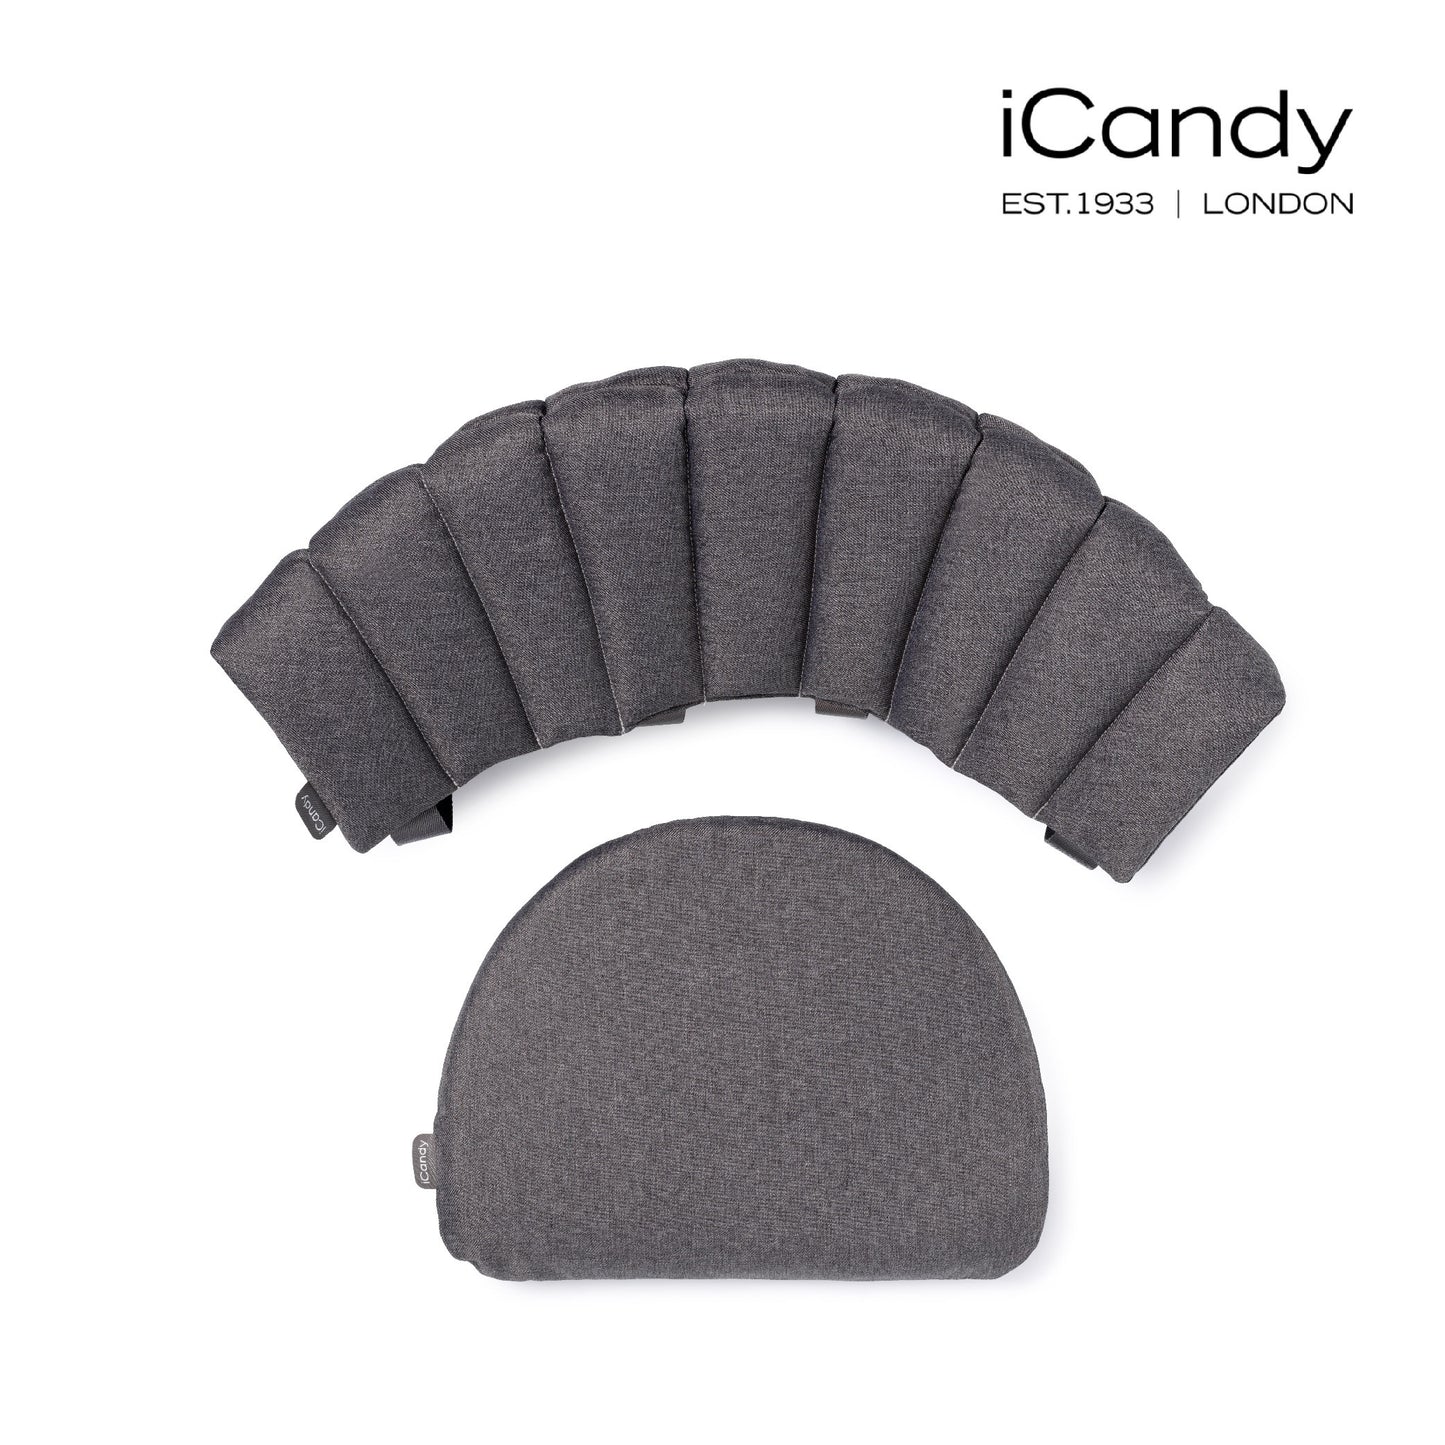 【iCandy】MiChair Fashionable Children's Multifunctional Growing Dining Chair/Chair Cushion - 3 Colors Available